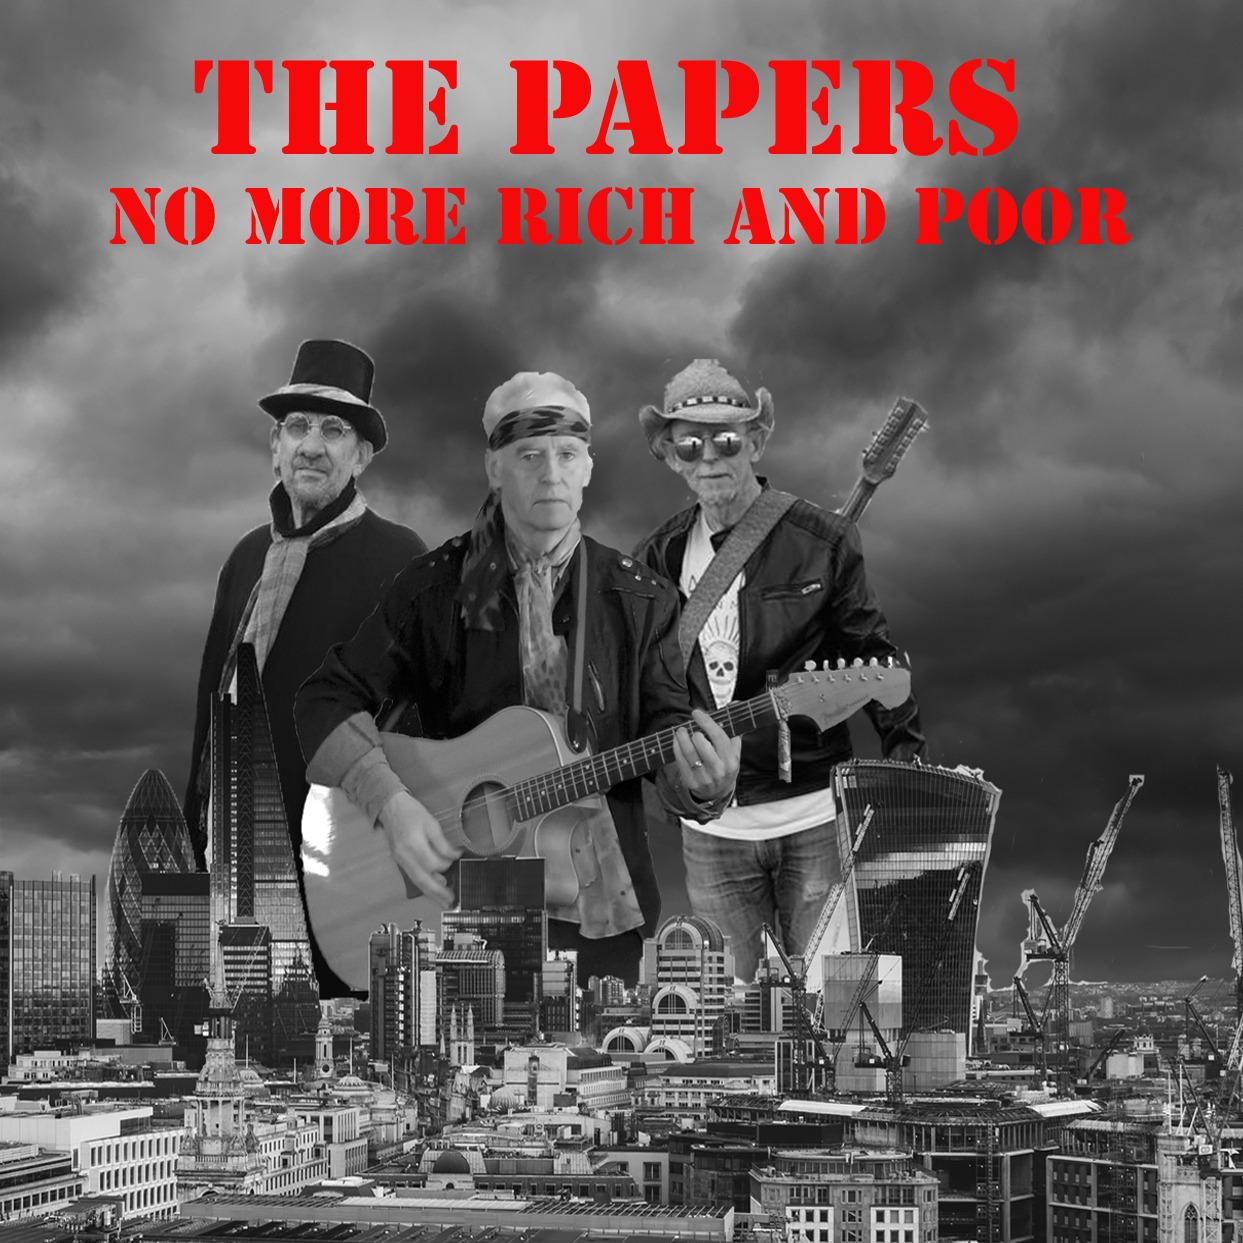 Accentuating Real Issues with Thought-Provoking Lyricism - Multi-Genre Artists ‘The Papers’ Stun with New Single